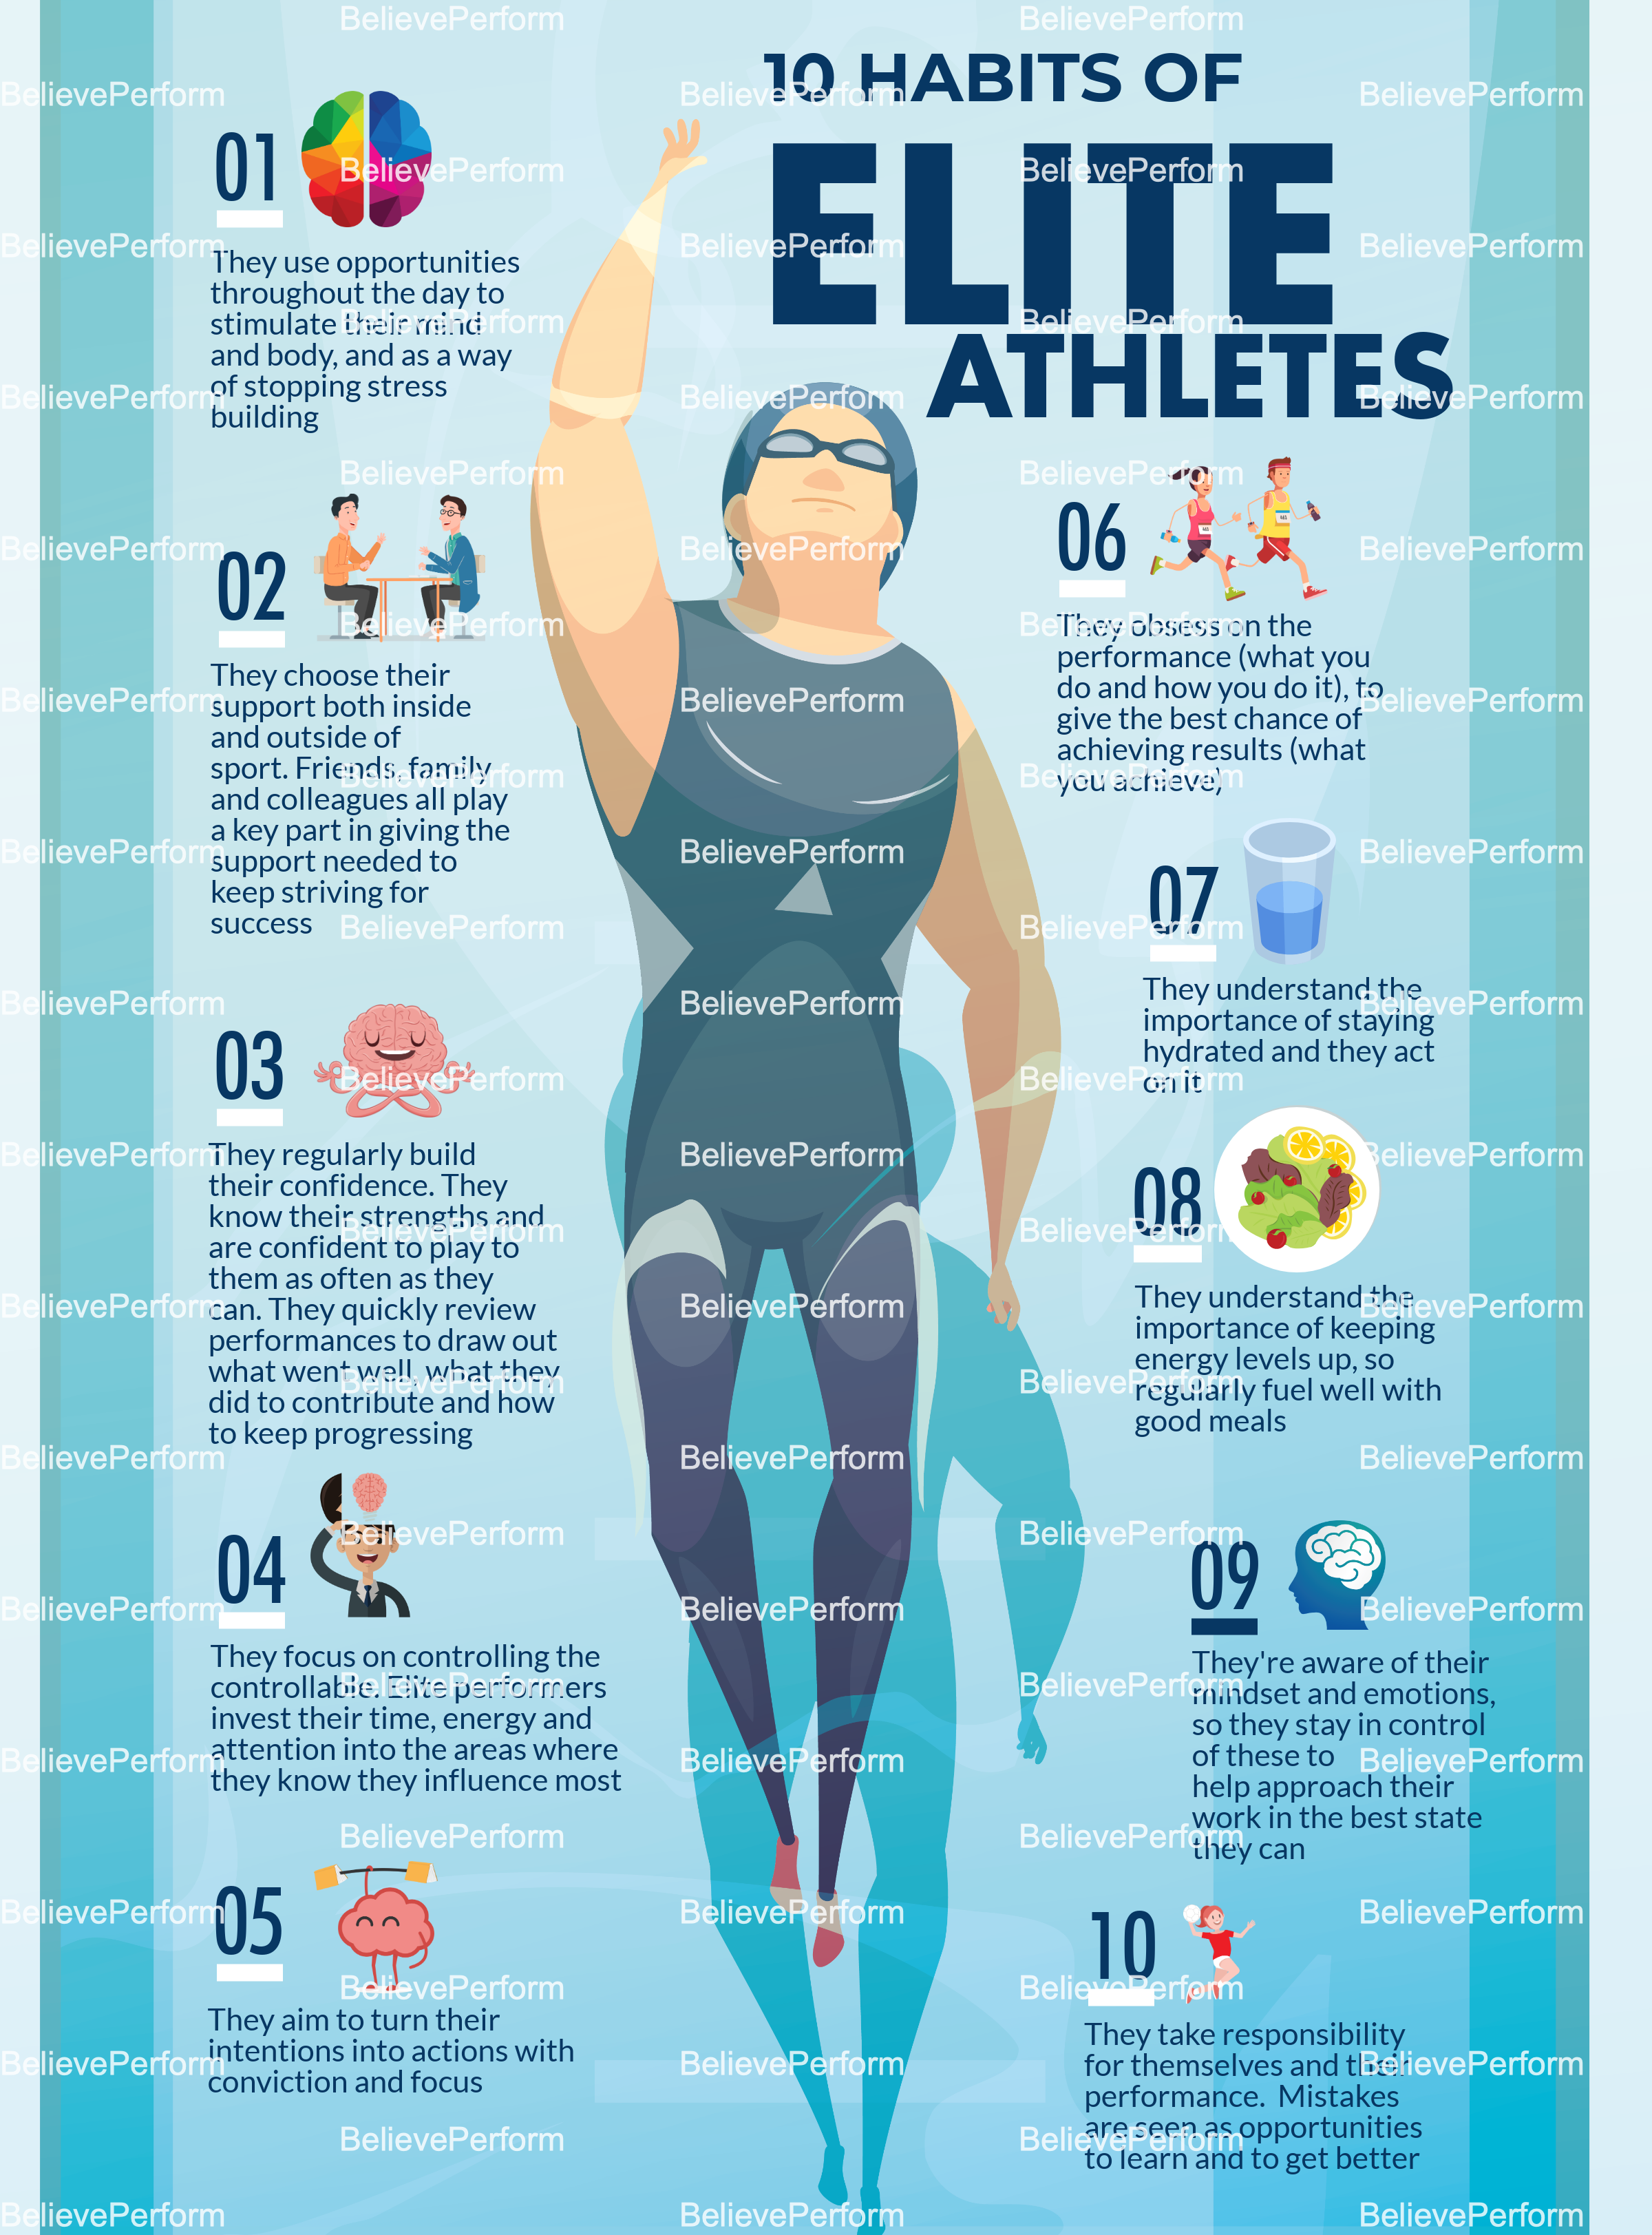 Habits for athletic performance